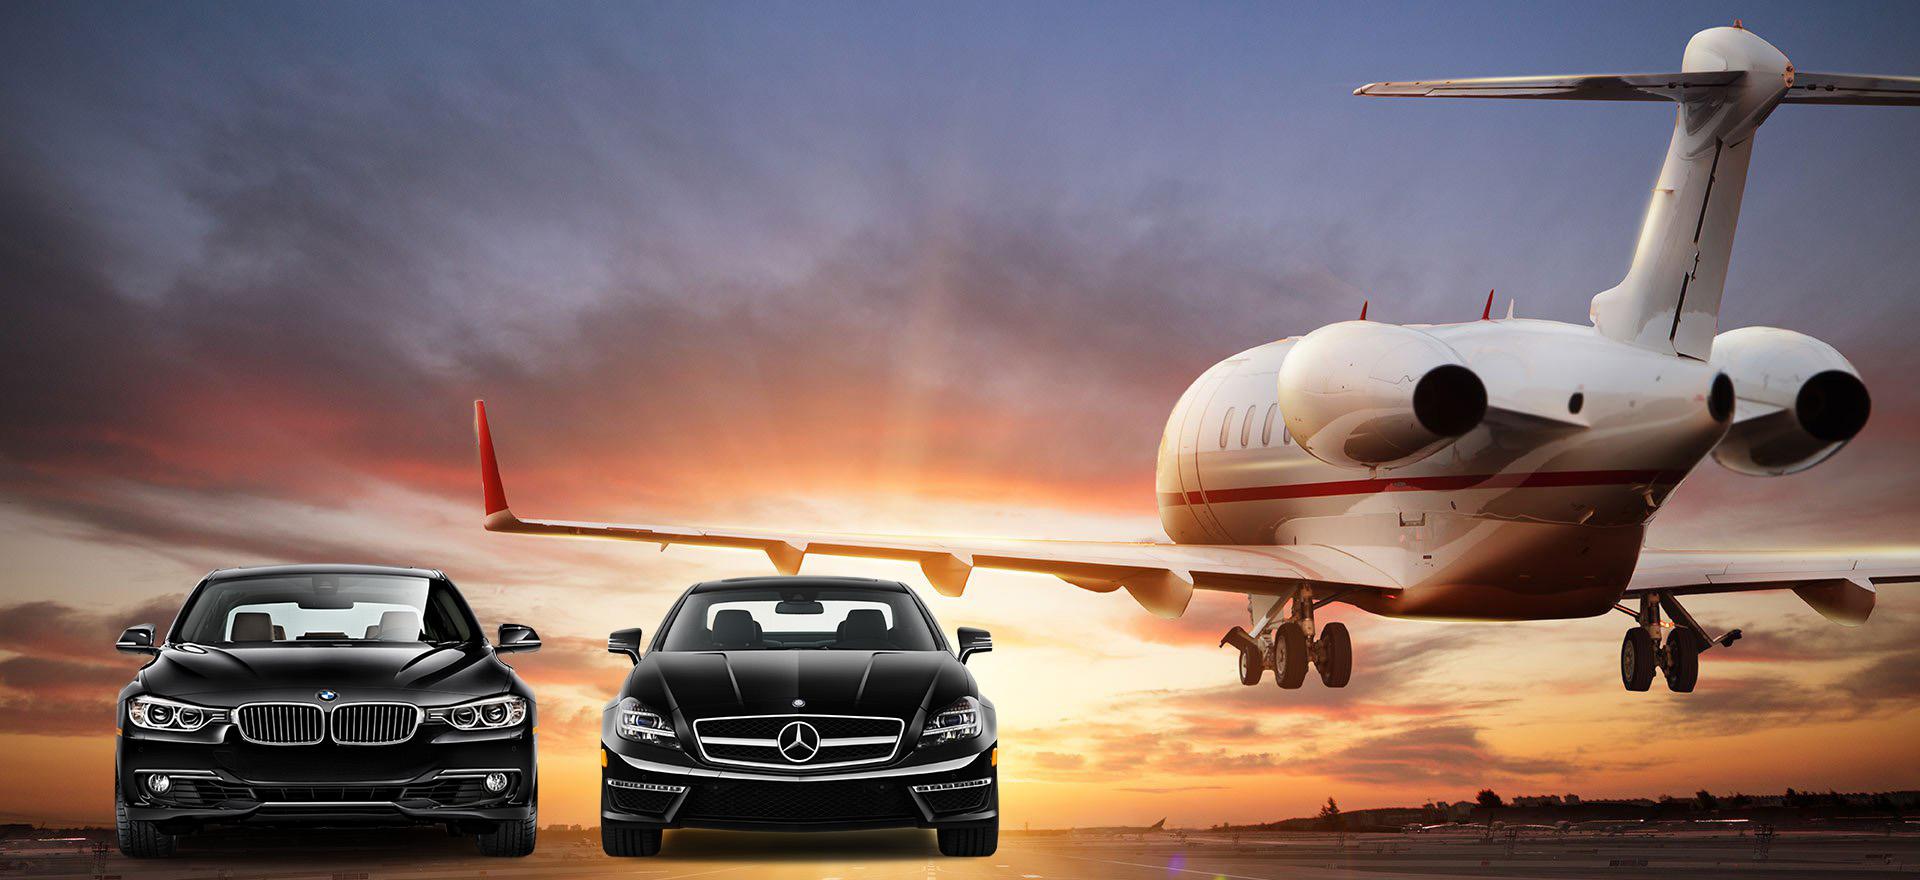 Book your airport taxi service in Toronto online with confidence.